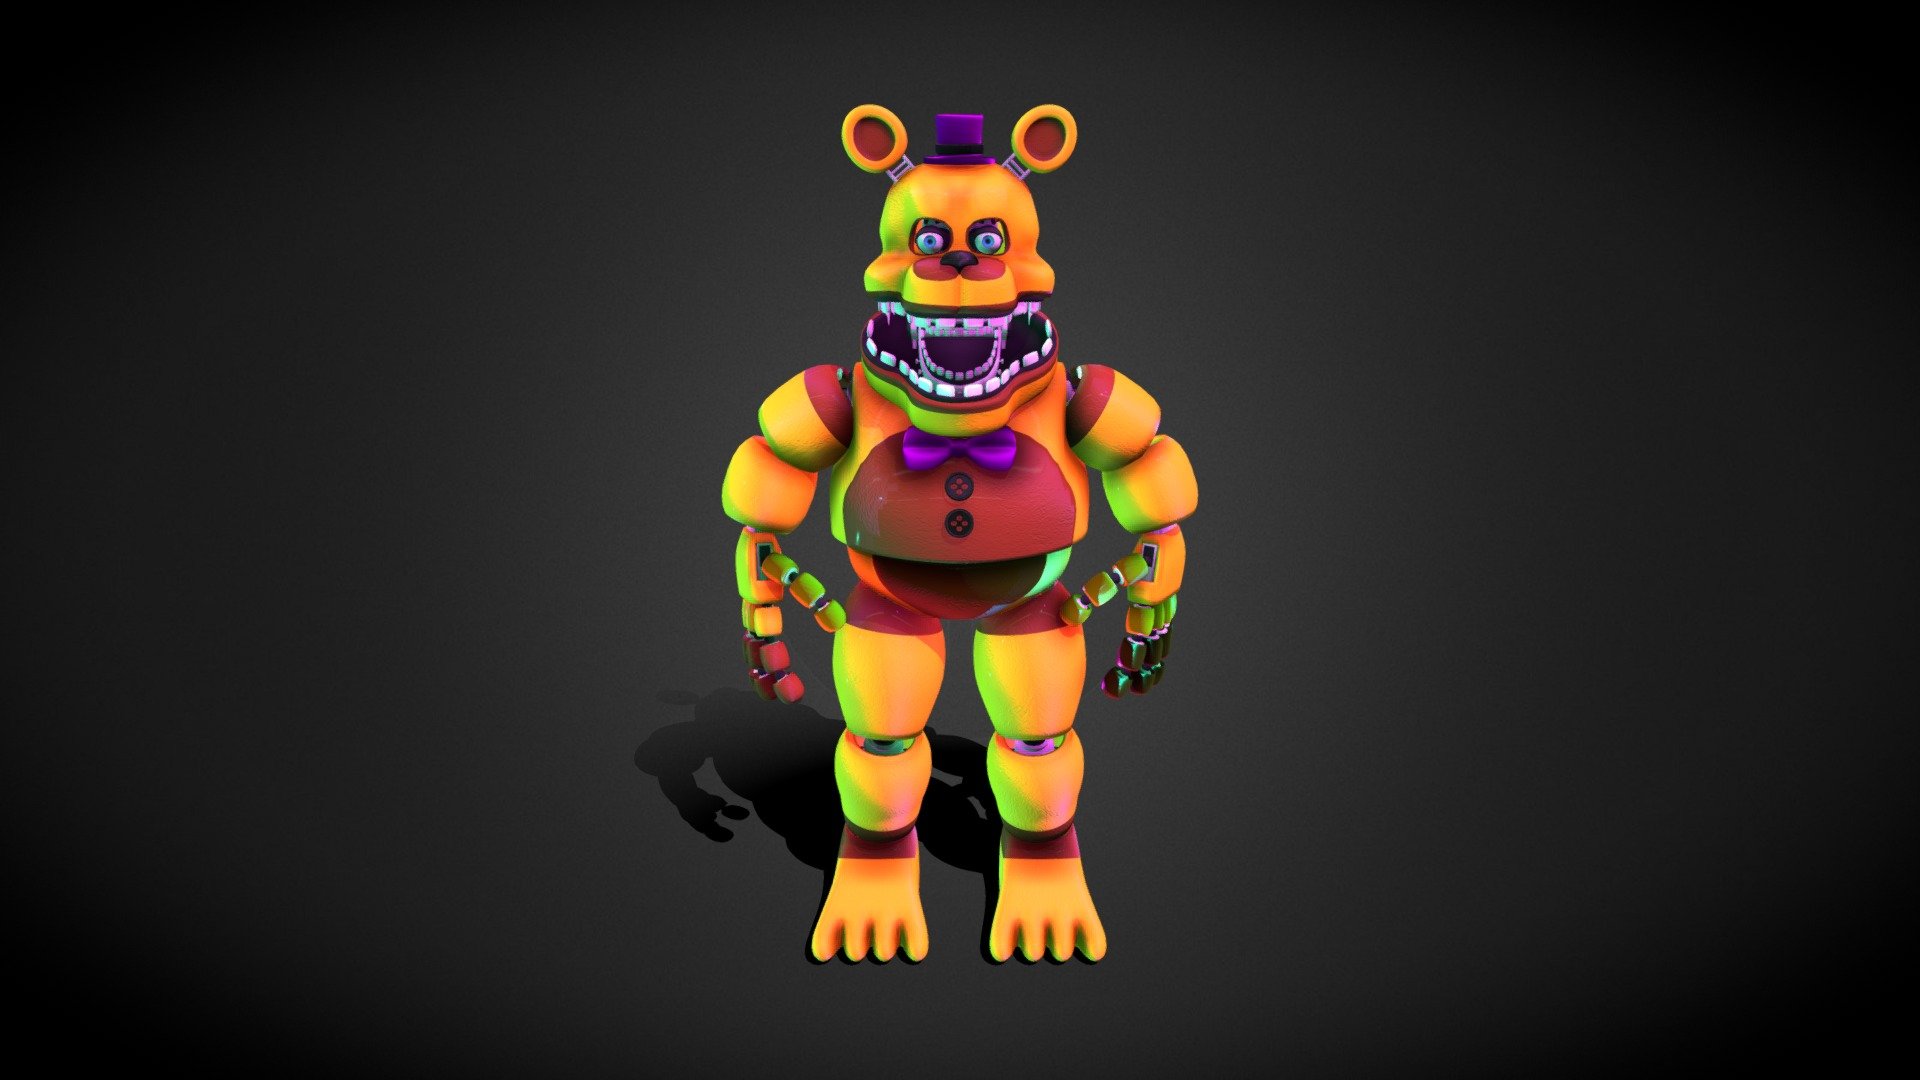 Fredbear 1987 - Download Free 3D model by sprngtrp727 (@sprngtrp727)  [d4f1685]